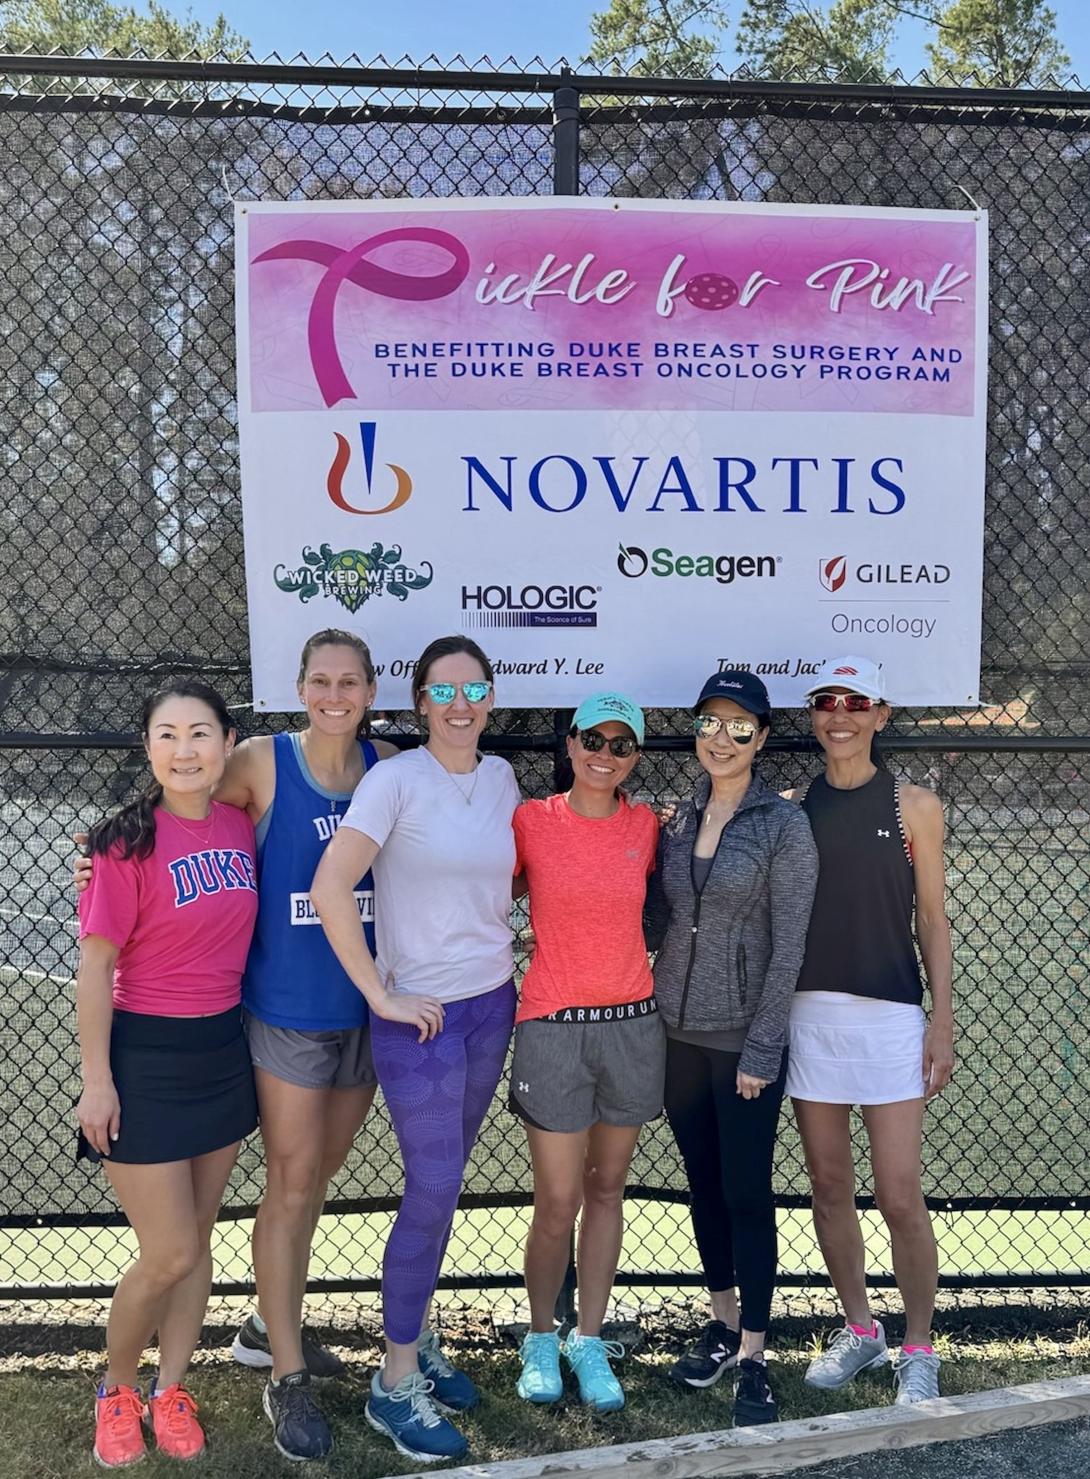 Six women in athleticwear pose in front of a black grated court under a "Pickle for Pink" event poster that includes a list of sponsors